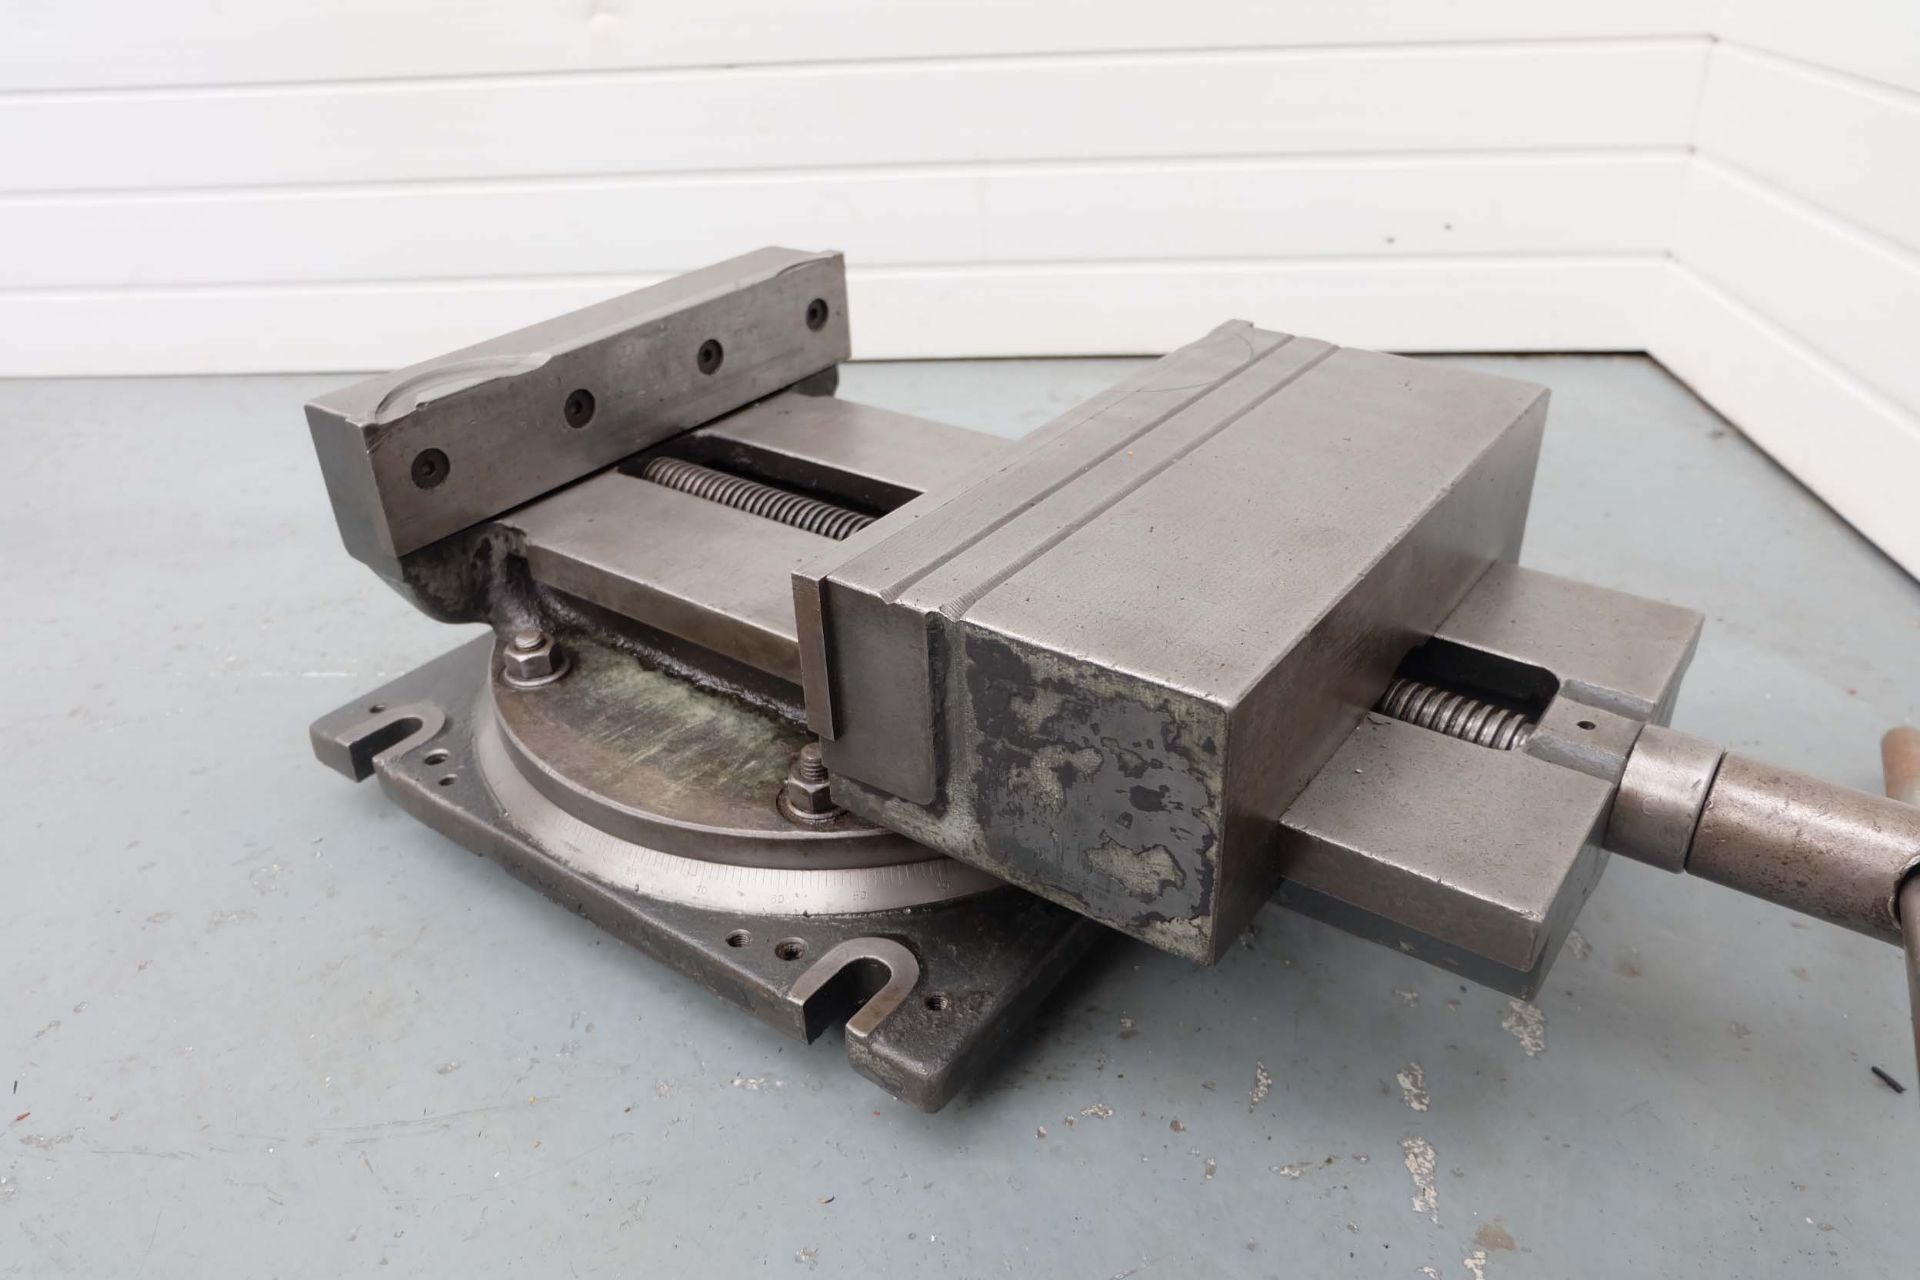 14" Swivelling Machine Vice. Width of Jaws 14". Height of Jaws 3". Max Opening 14". Clamping Slot Di - Image 4 of 8